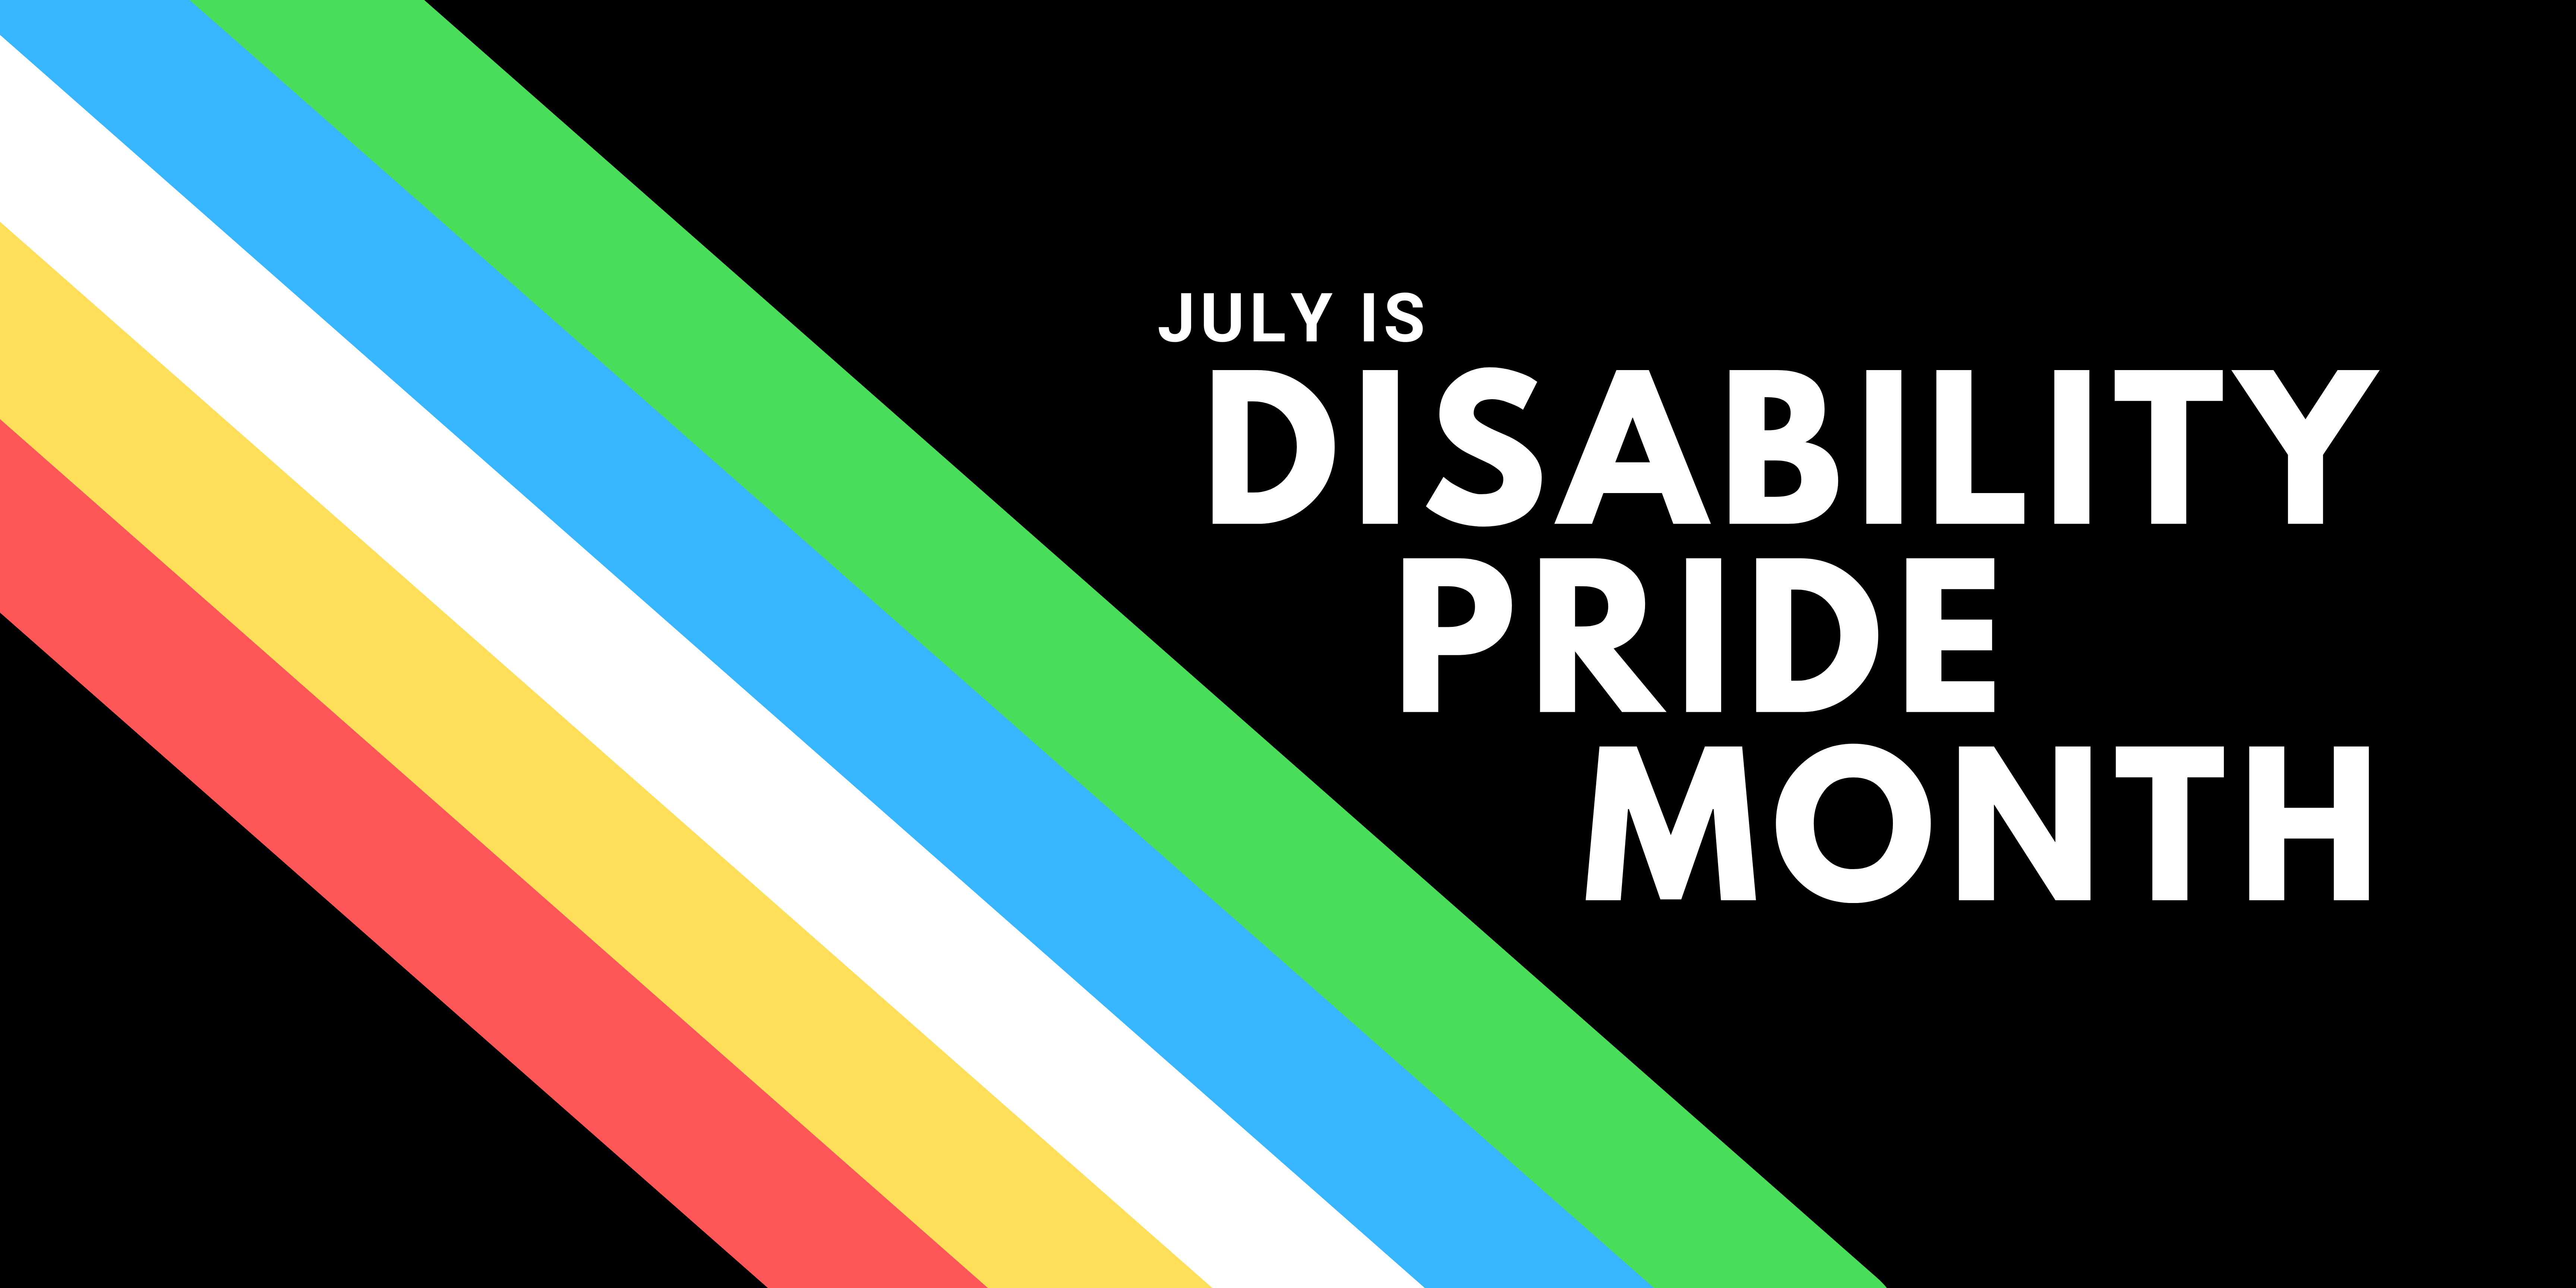 Happy Disability Pride Month!